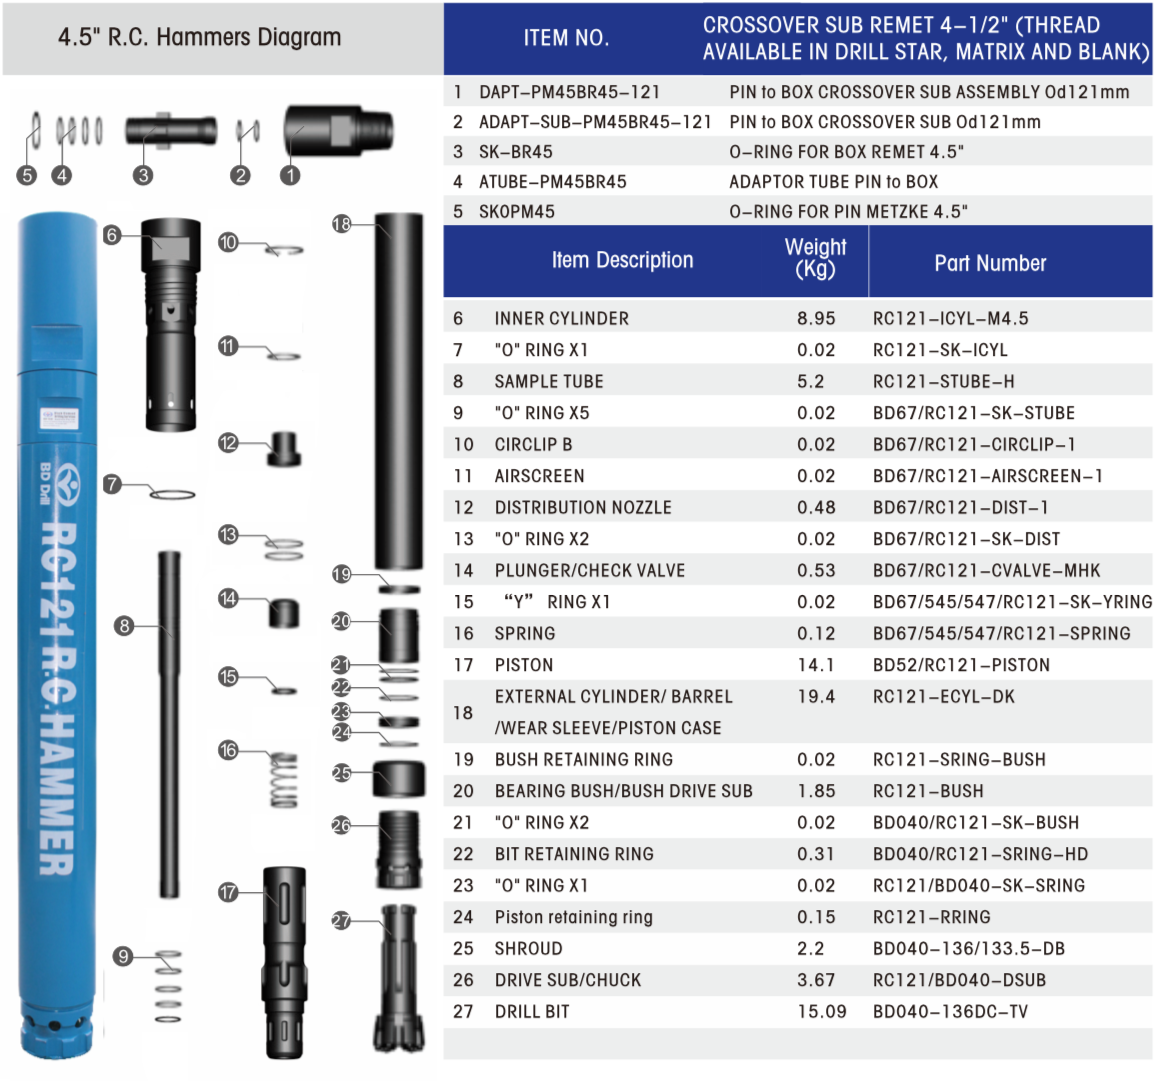 Black Diamond Drilling RC121 BD040 RC Reverse Circulation Hammer schematic and parts list